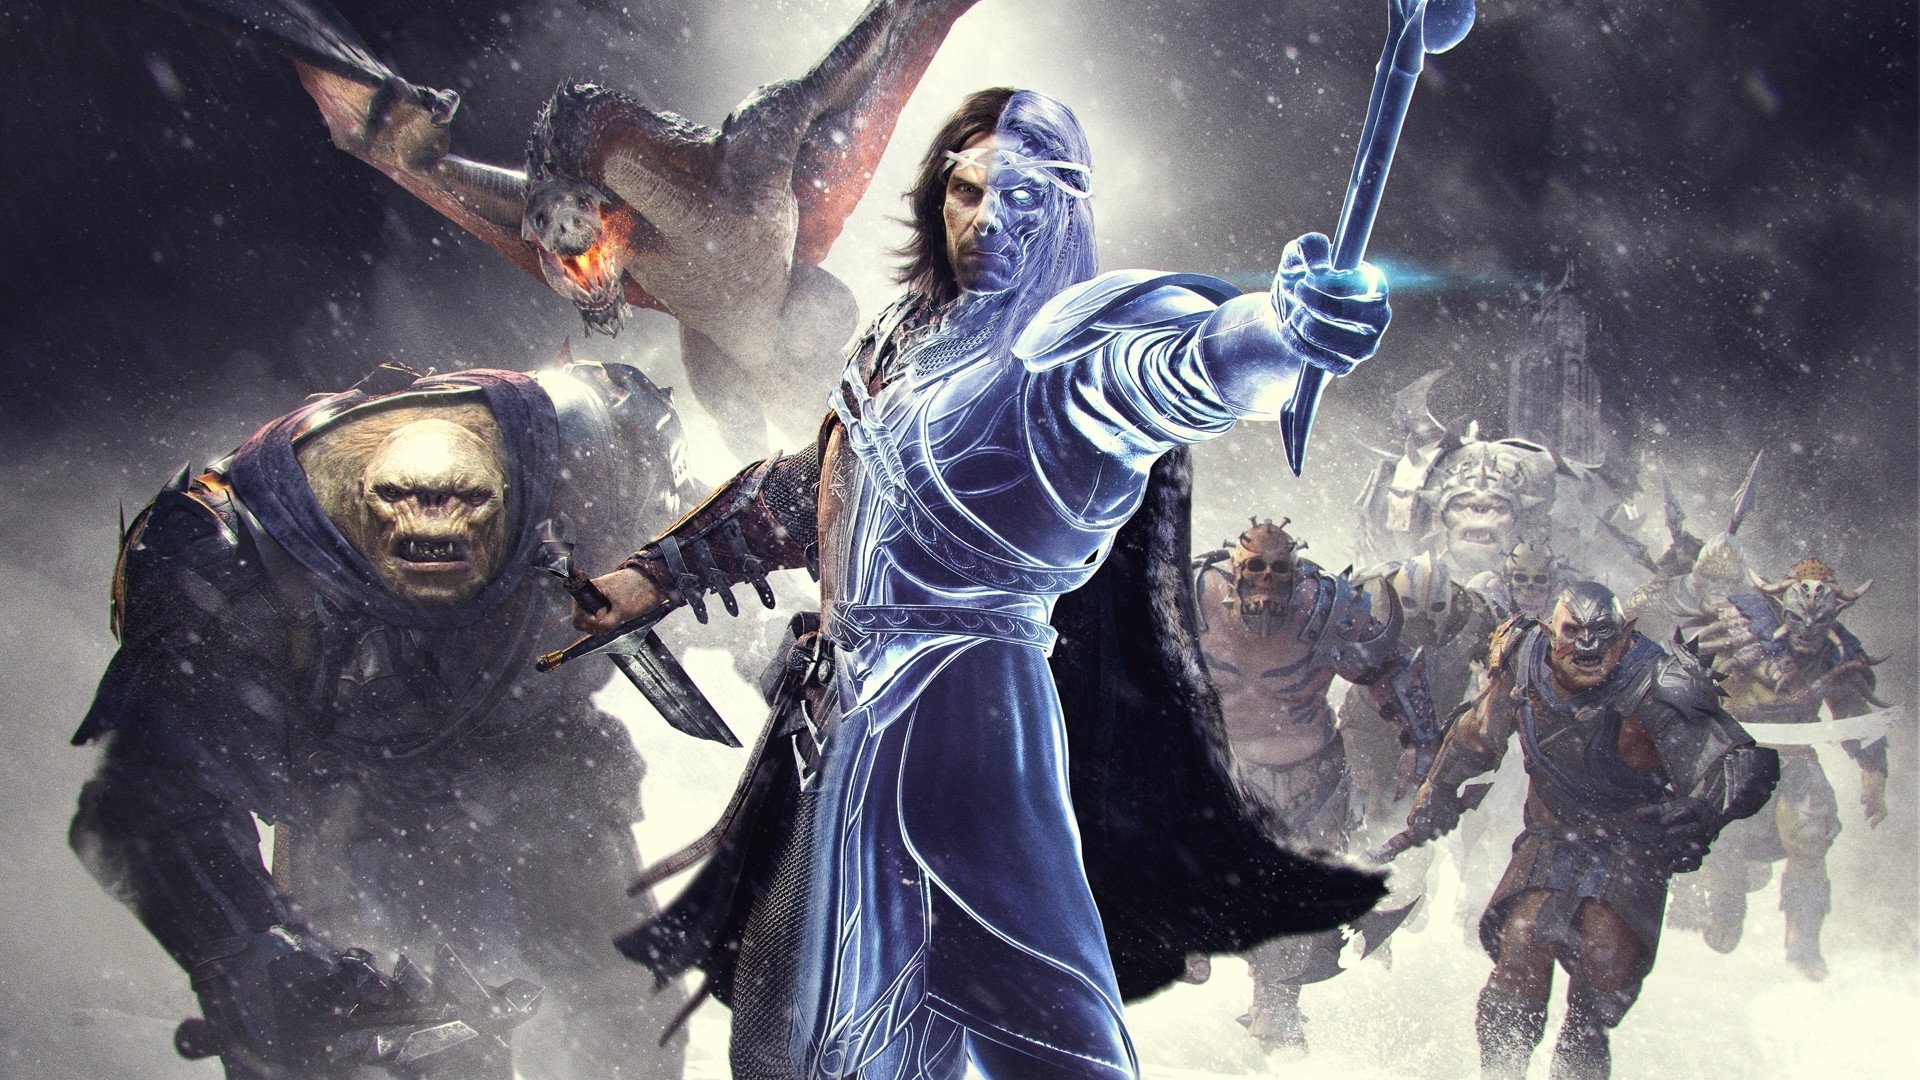 Middle-earth: Shadow of Mordor] felt like a piece of shrakh in the